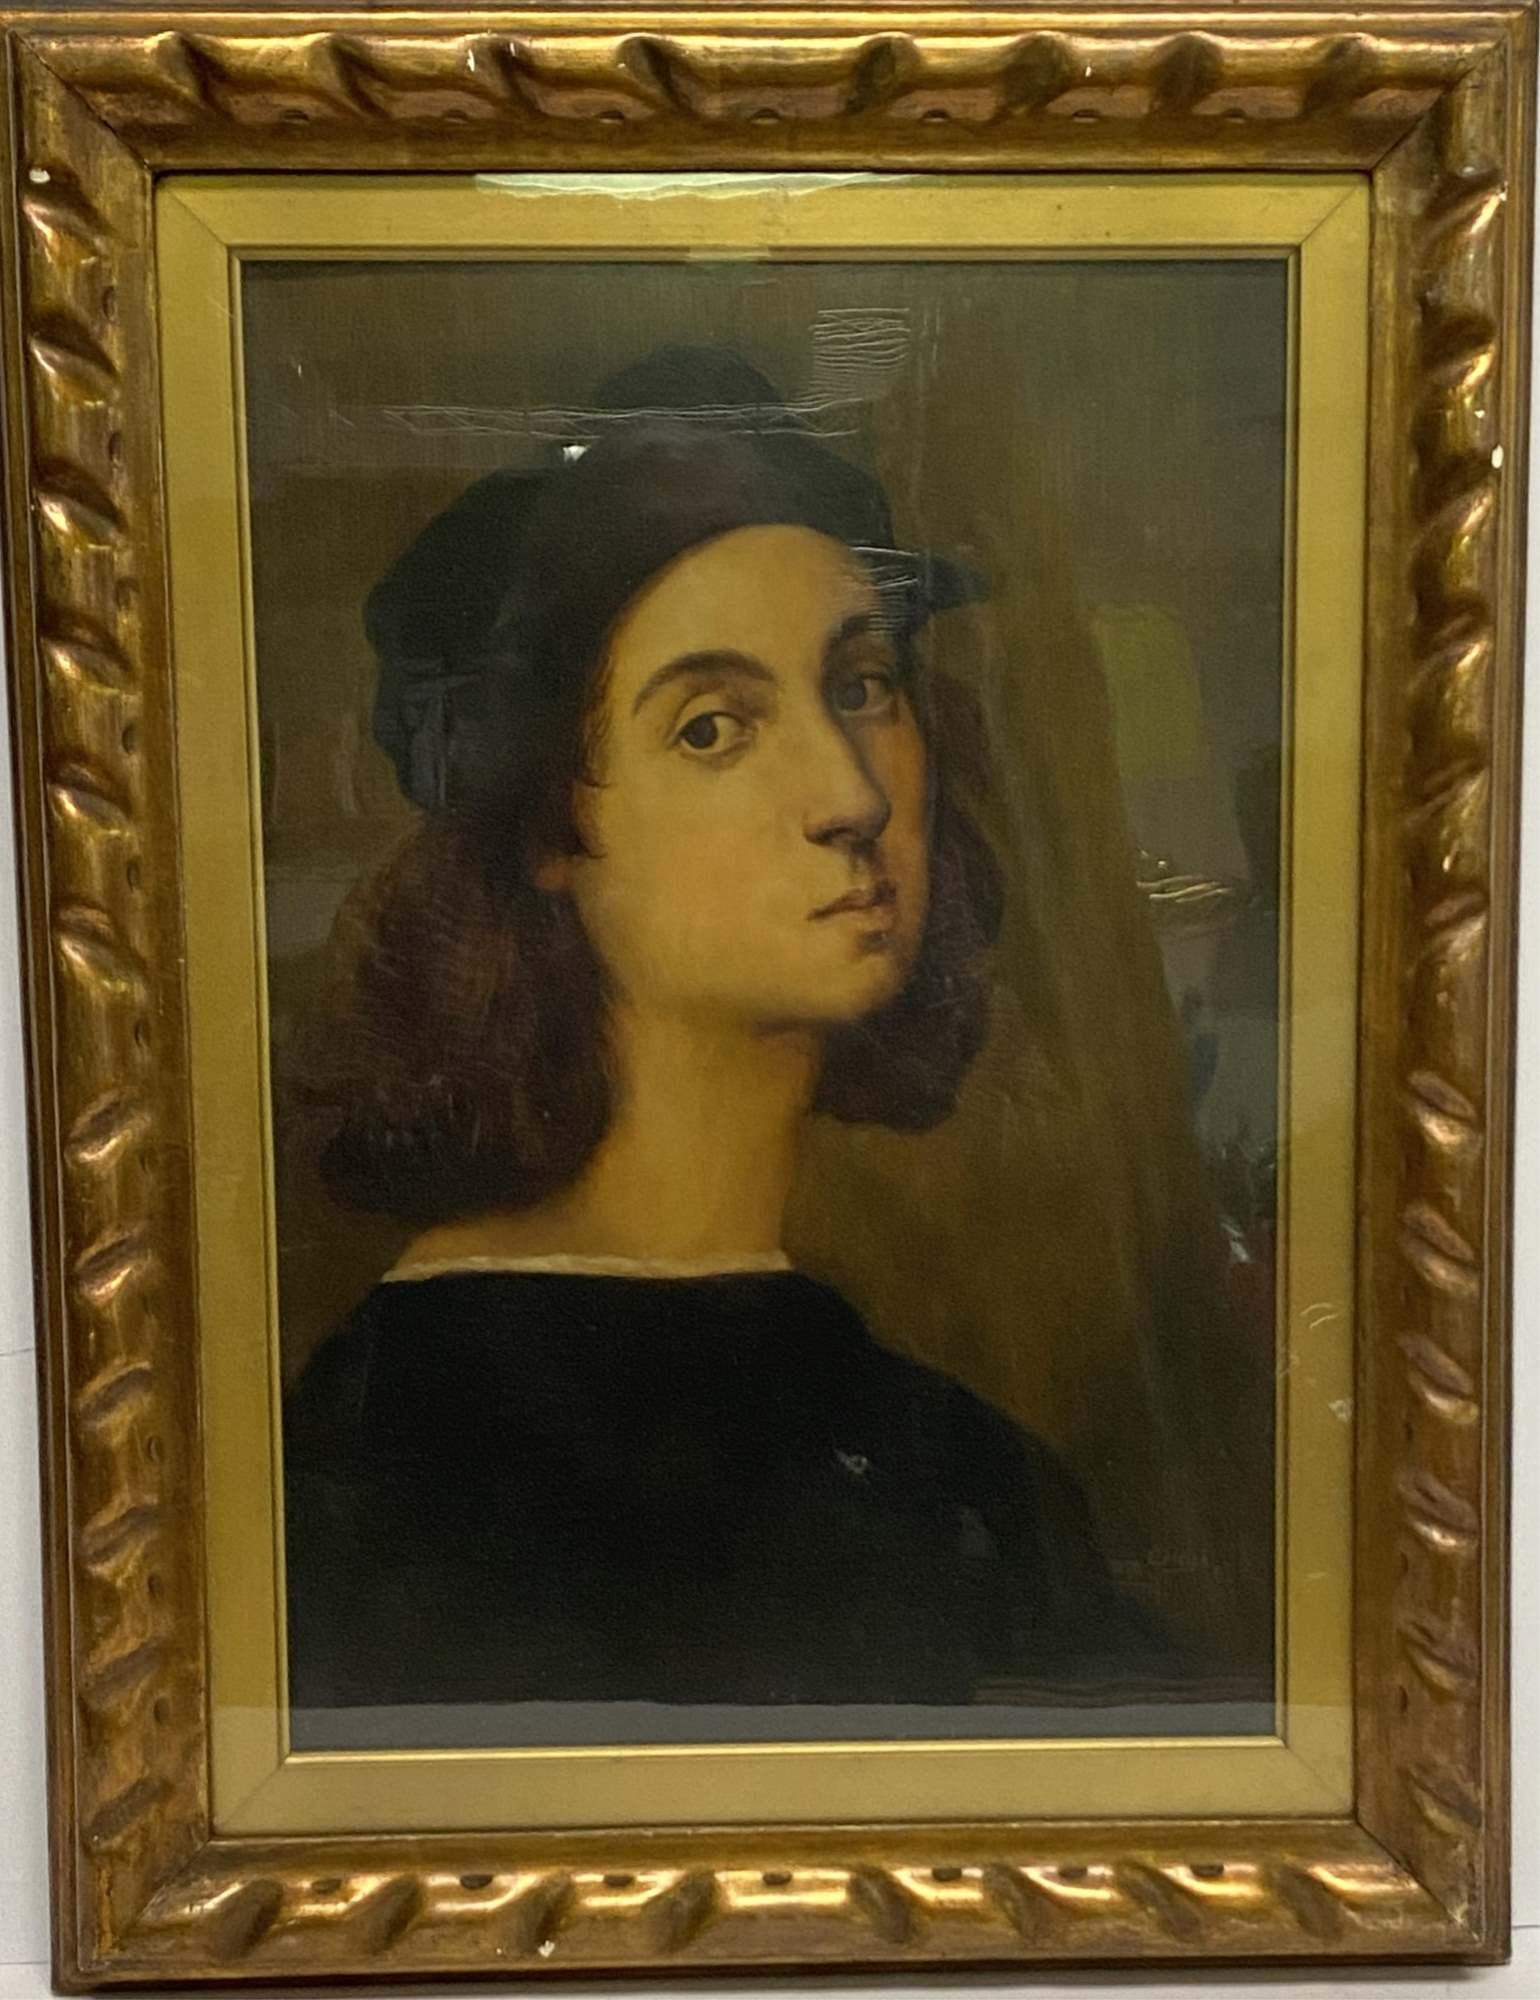 ON BOARD - APPEARS TO BE AN OIL - CLASSIC PORTRAIT